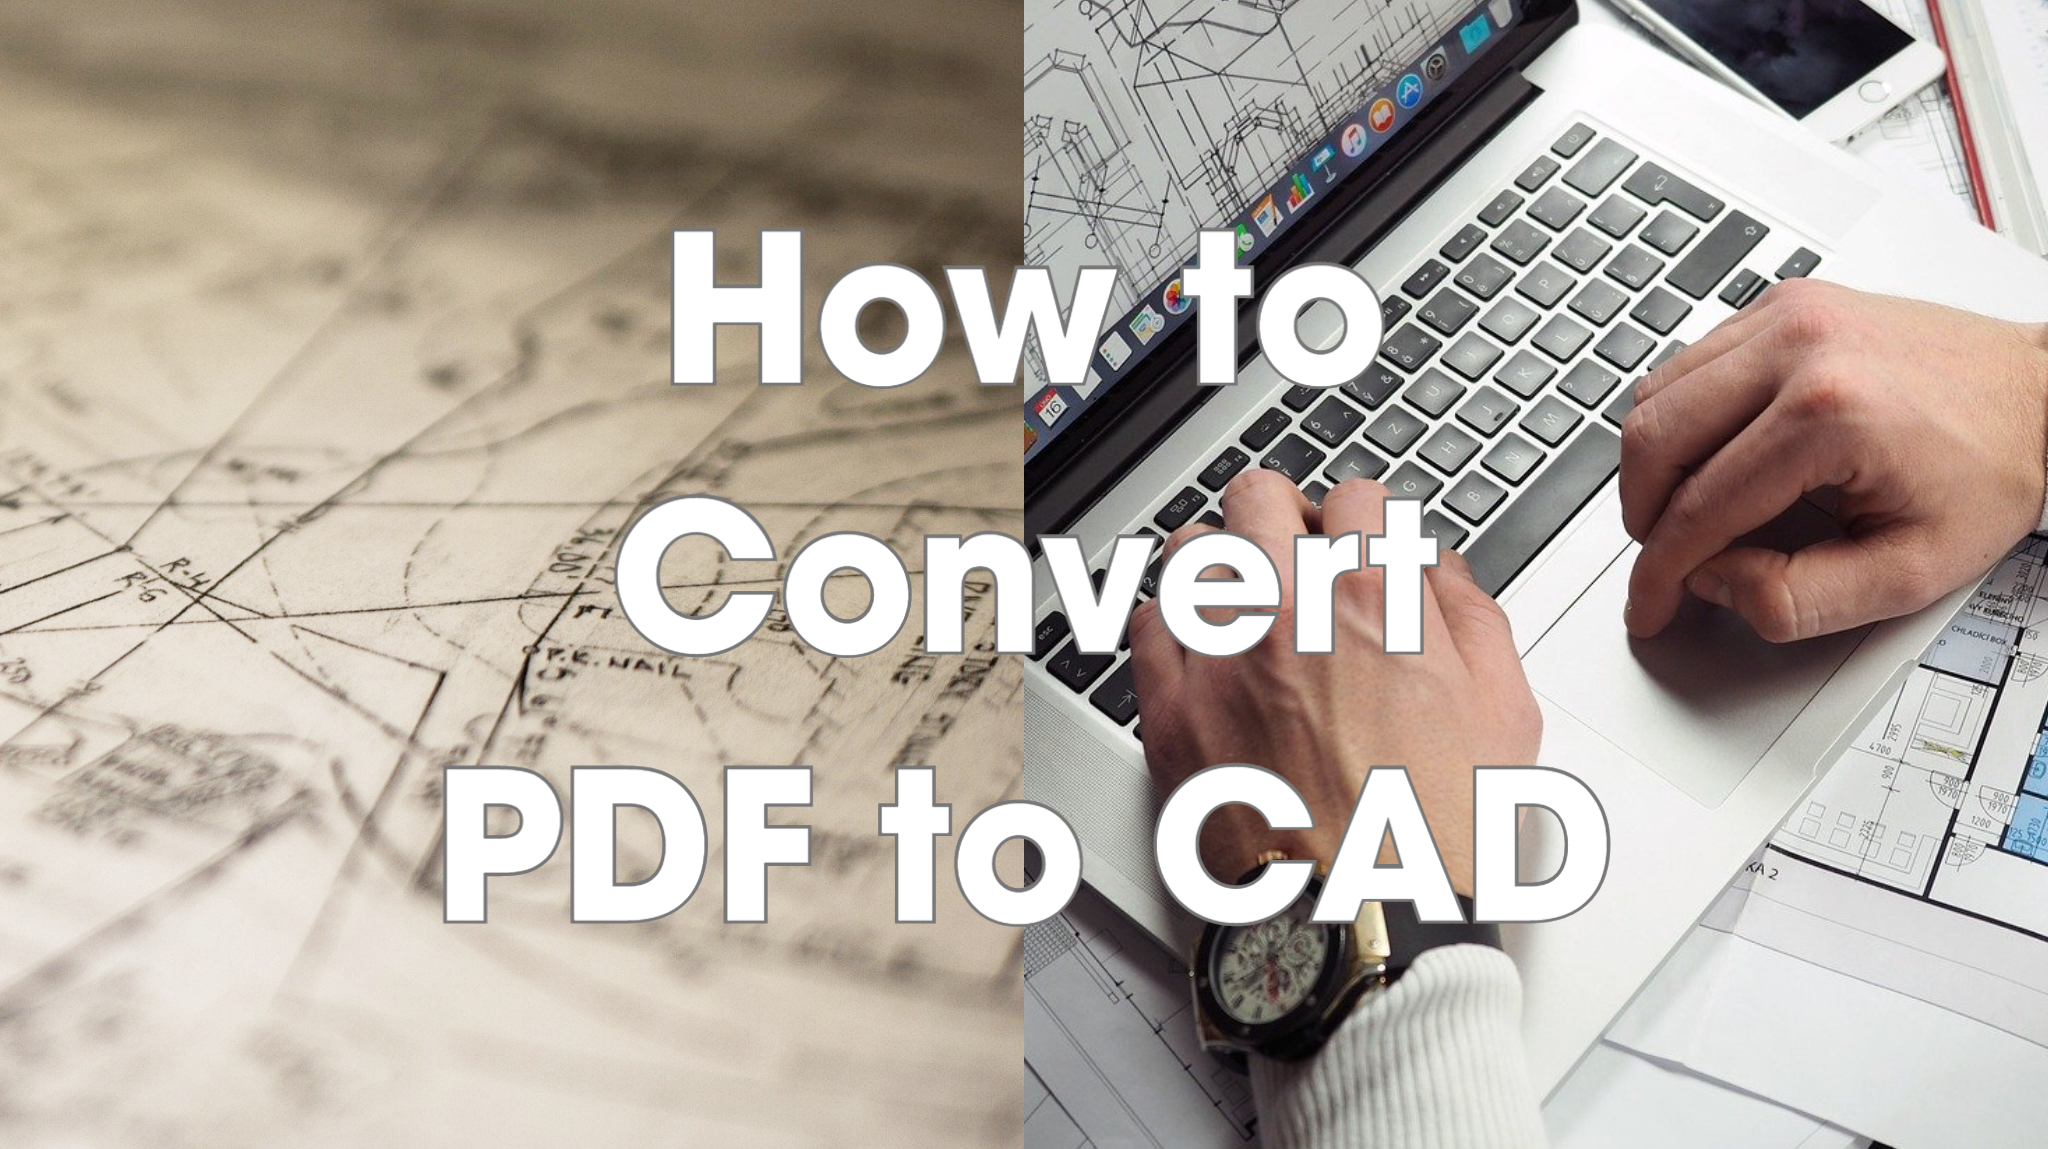 How to convert PDF to CAD